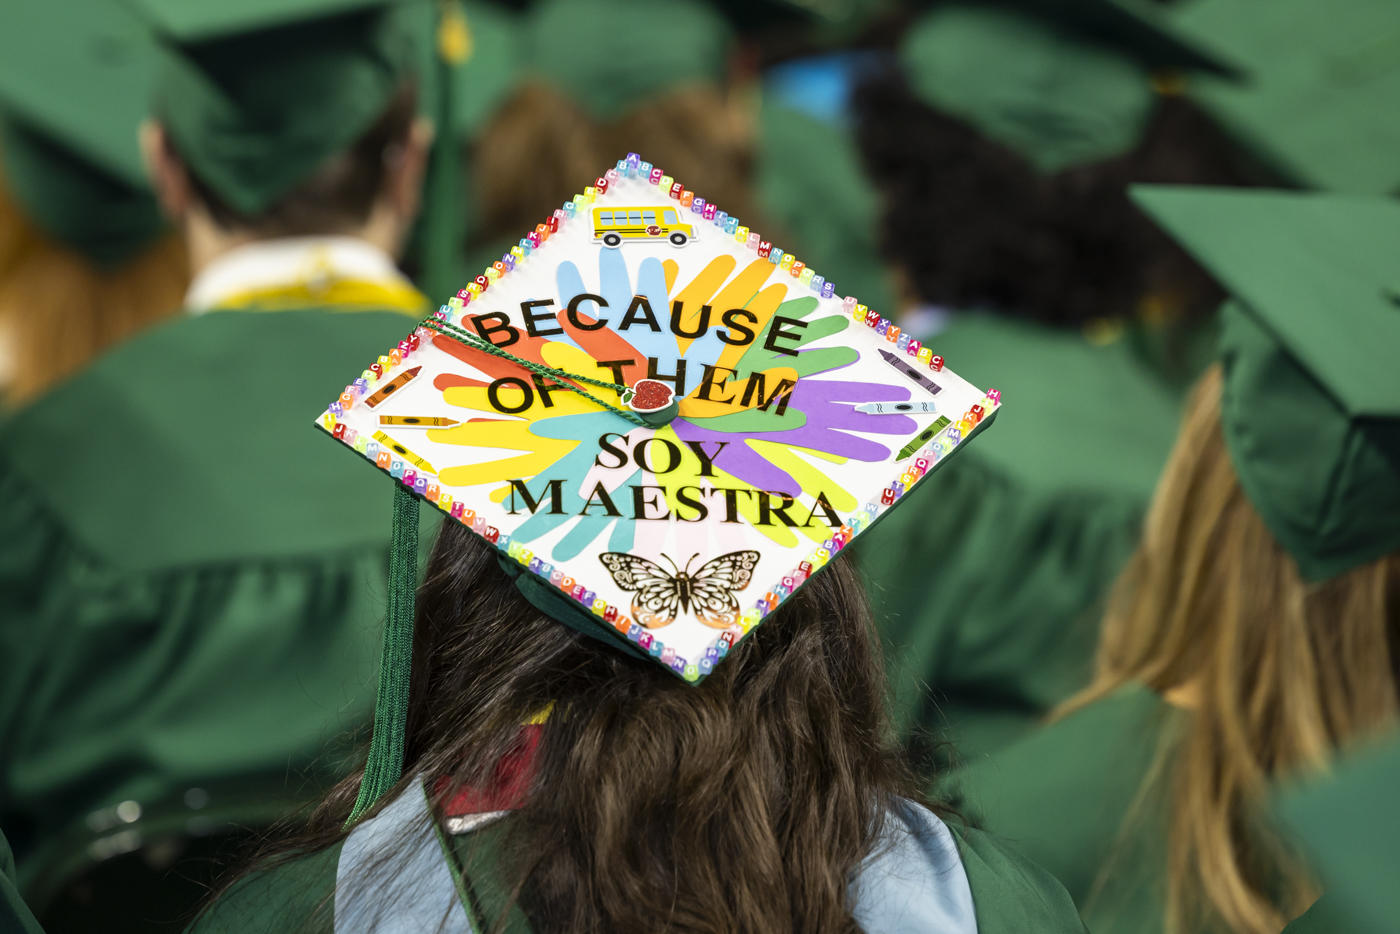 Graduation cap is decorated to say "Because of them soy maestra"